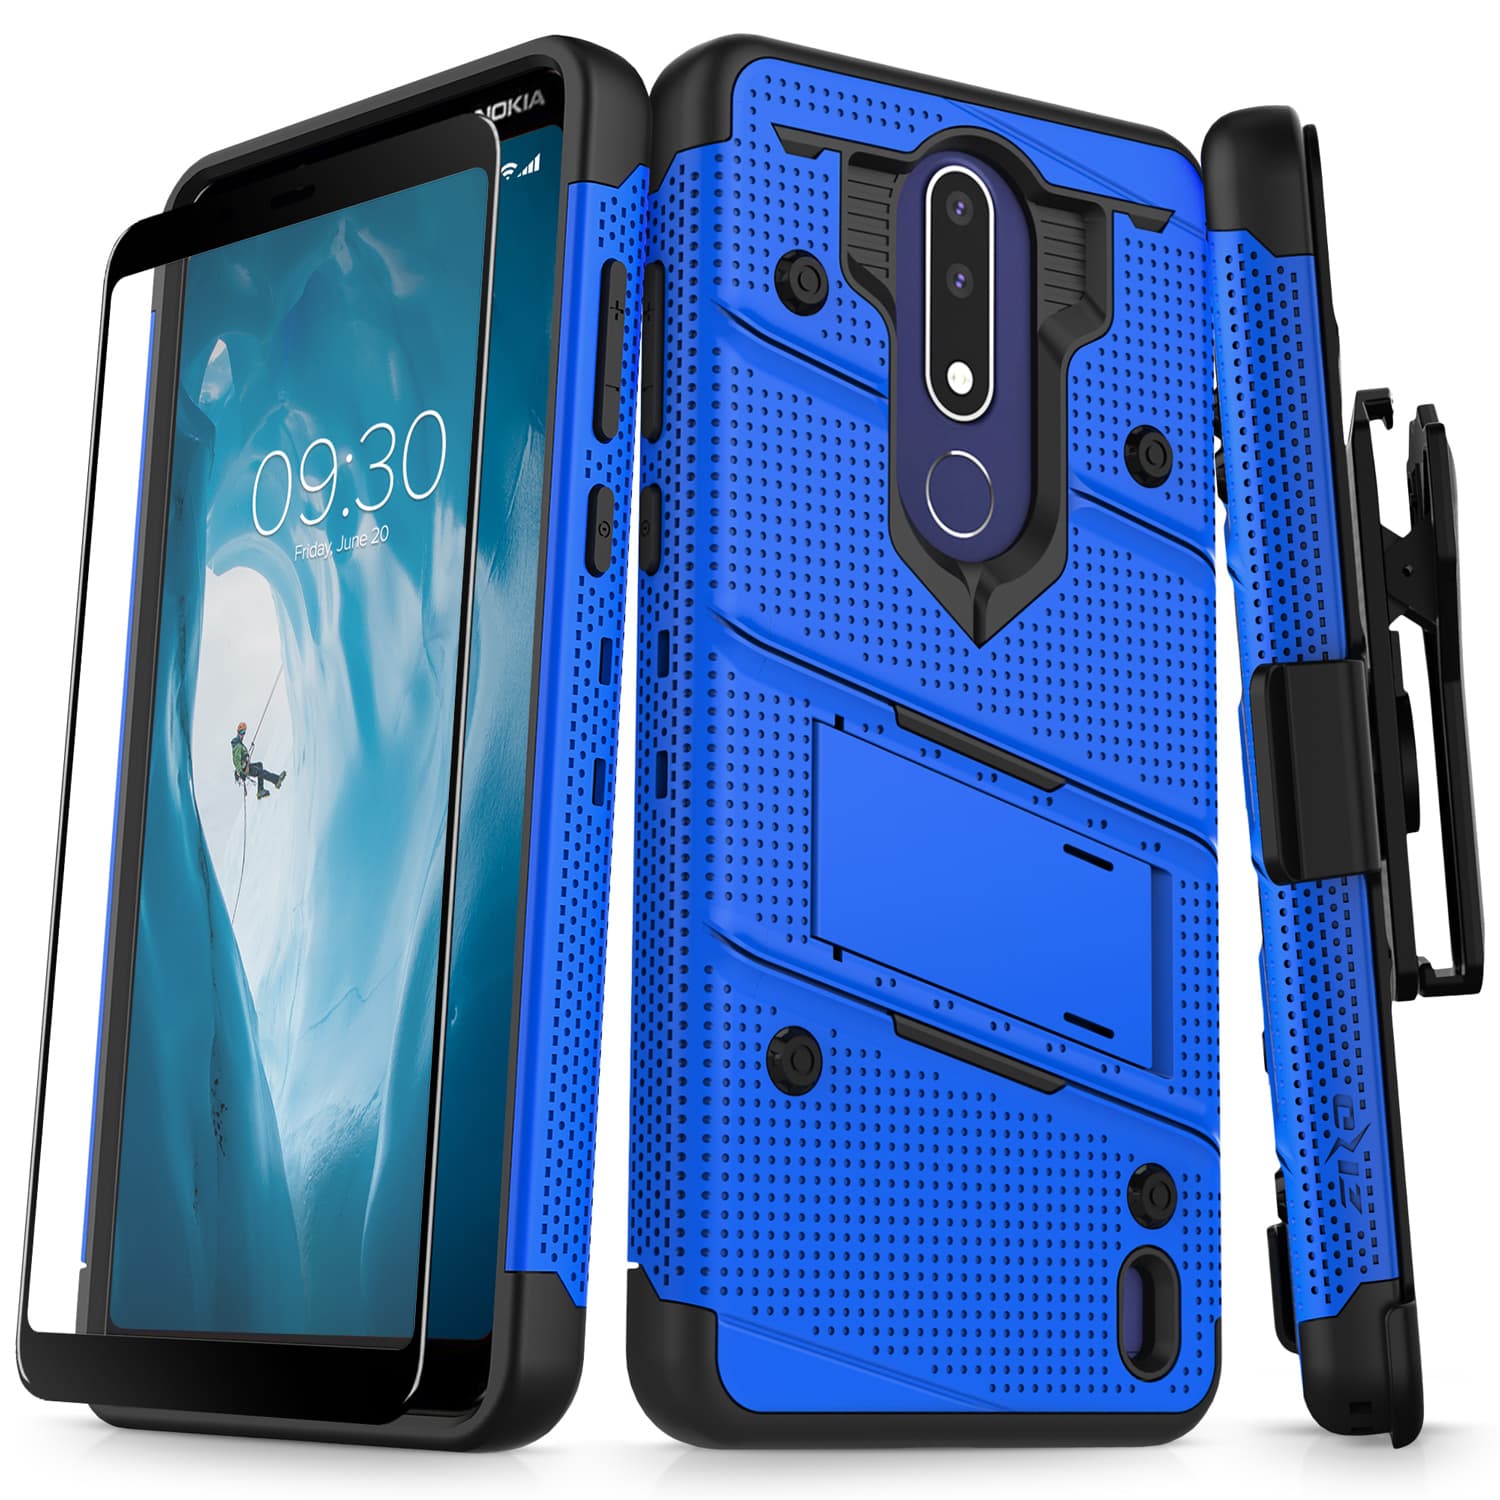 ZIZO BOLT Series for Nokia 3.1 Plus Case - Military Grade Drop Tested with Full Glass Screen Protector Holster and Kickstand